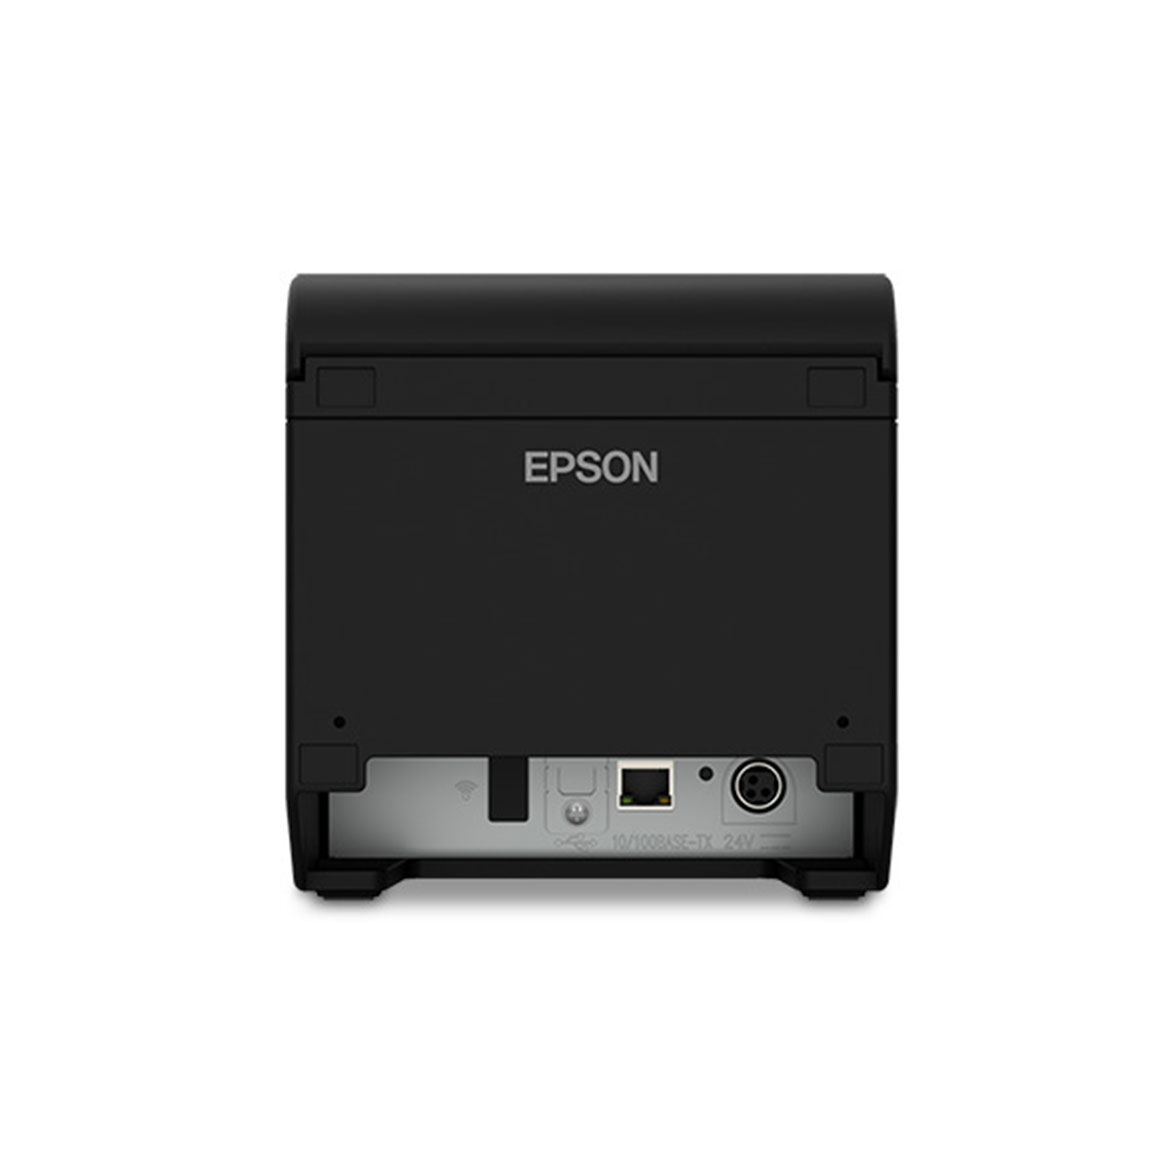 Epson Tm-T20III Thermal receipt printer ther back